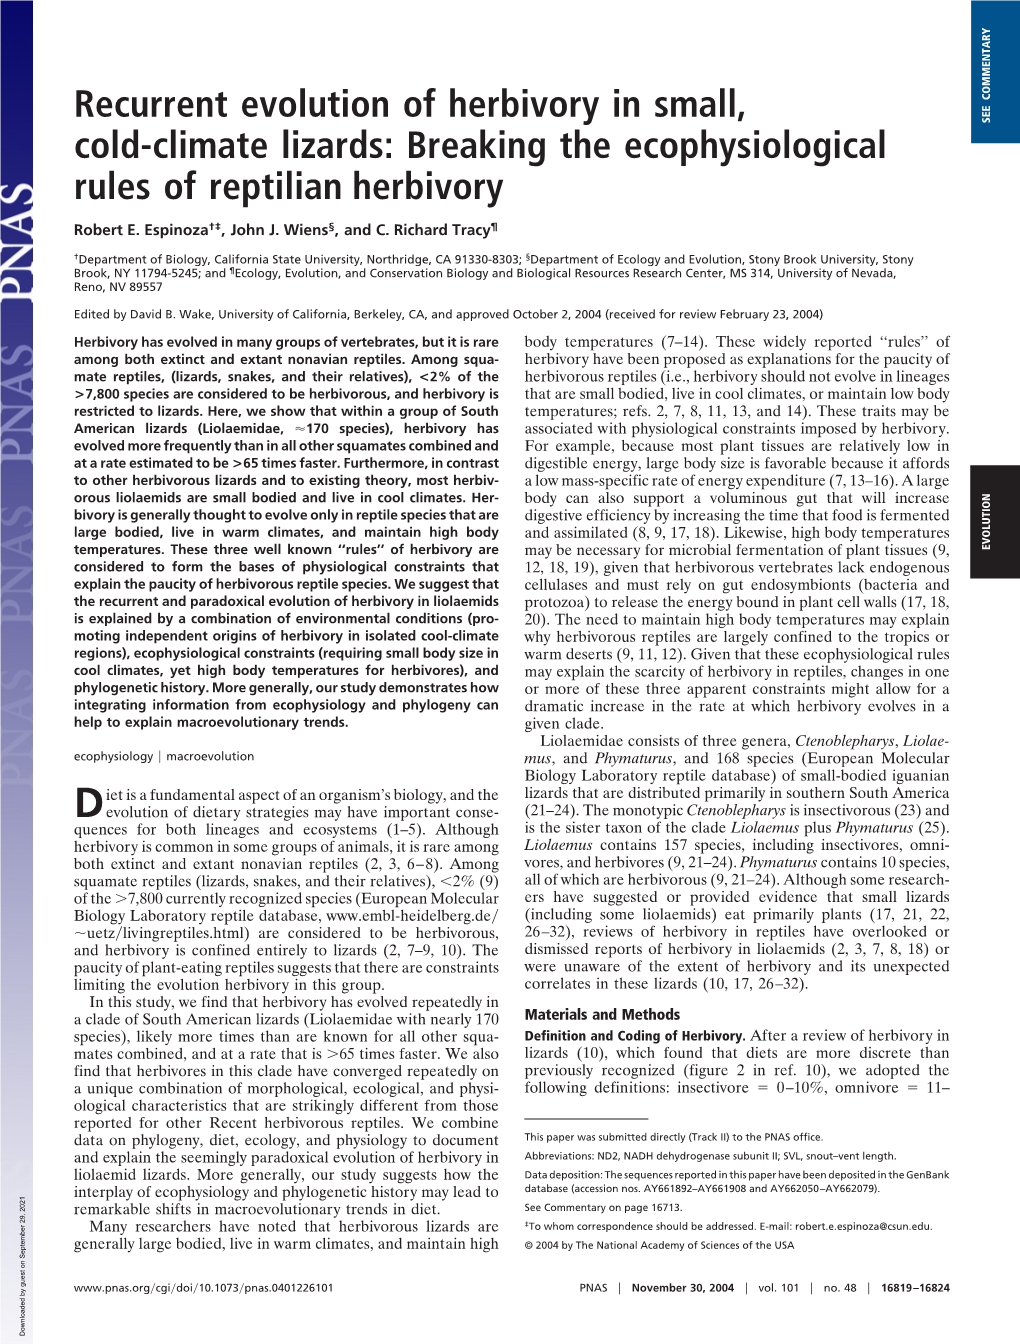 Recurrent Evolution of Herbivory in Small, Cold-Climate Lizards